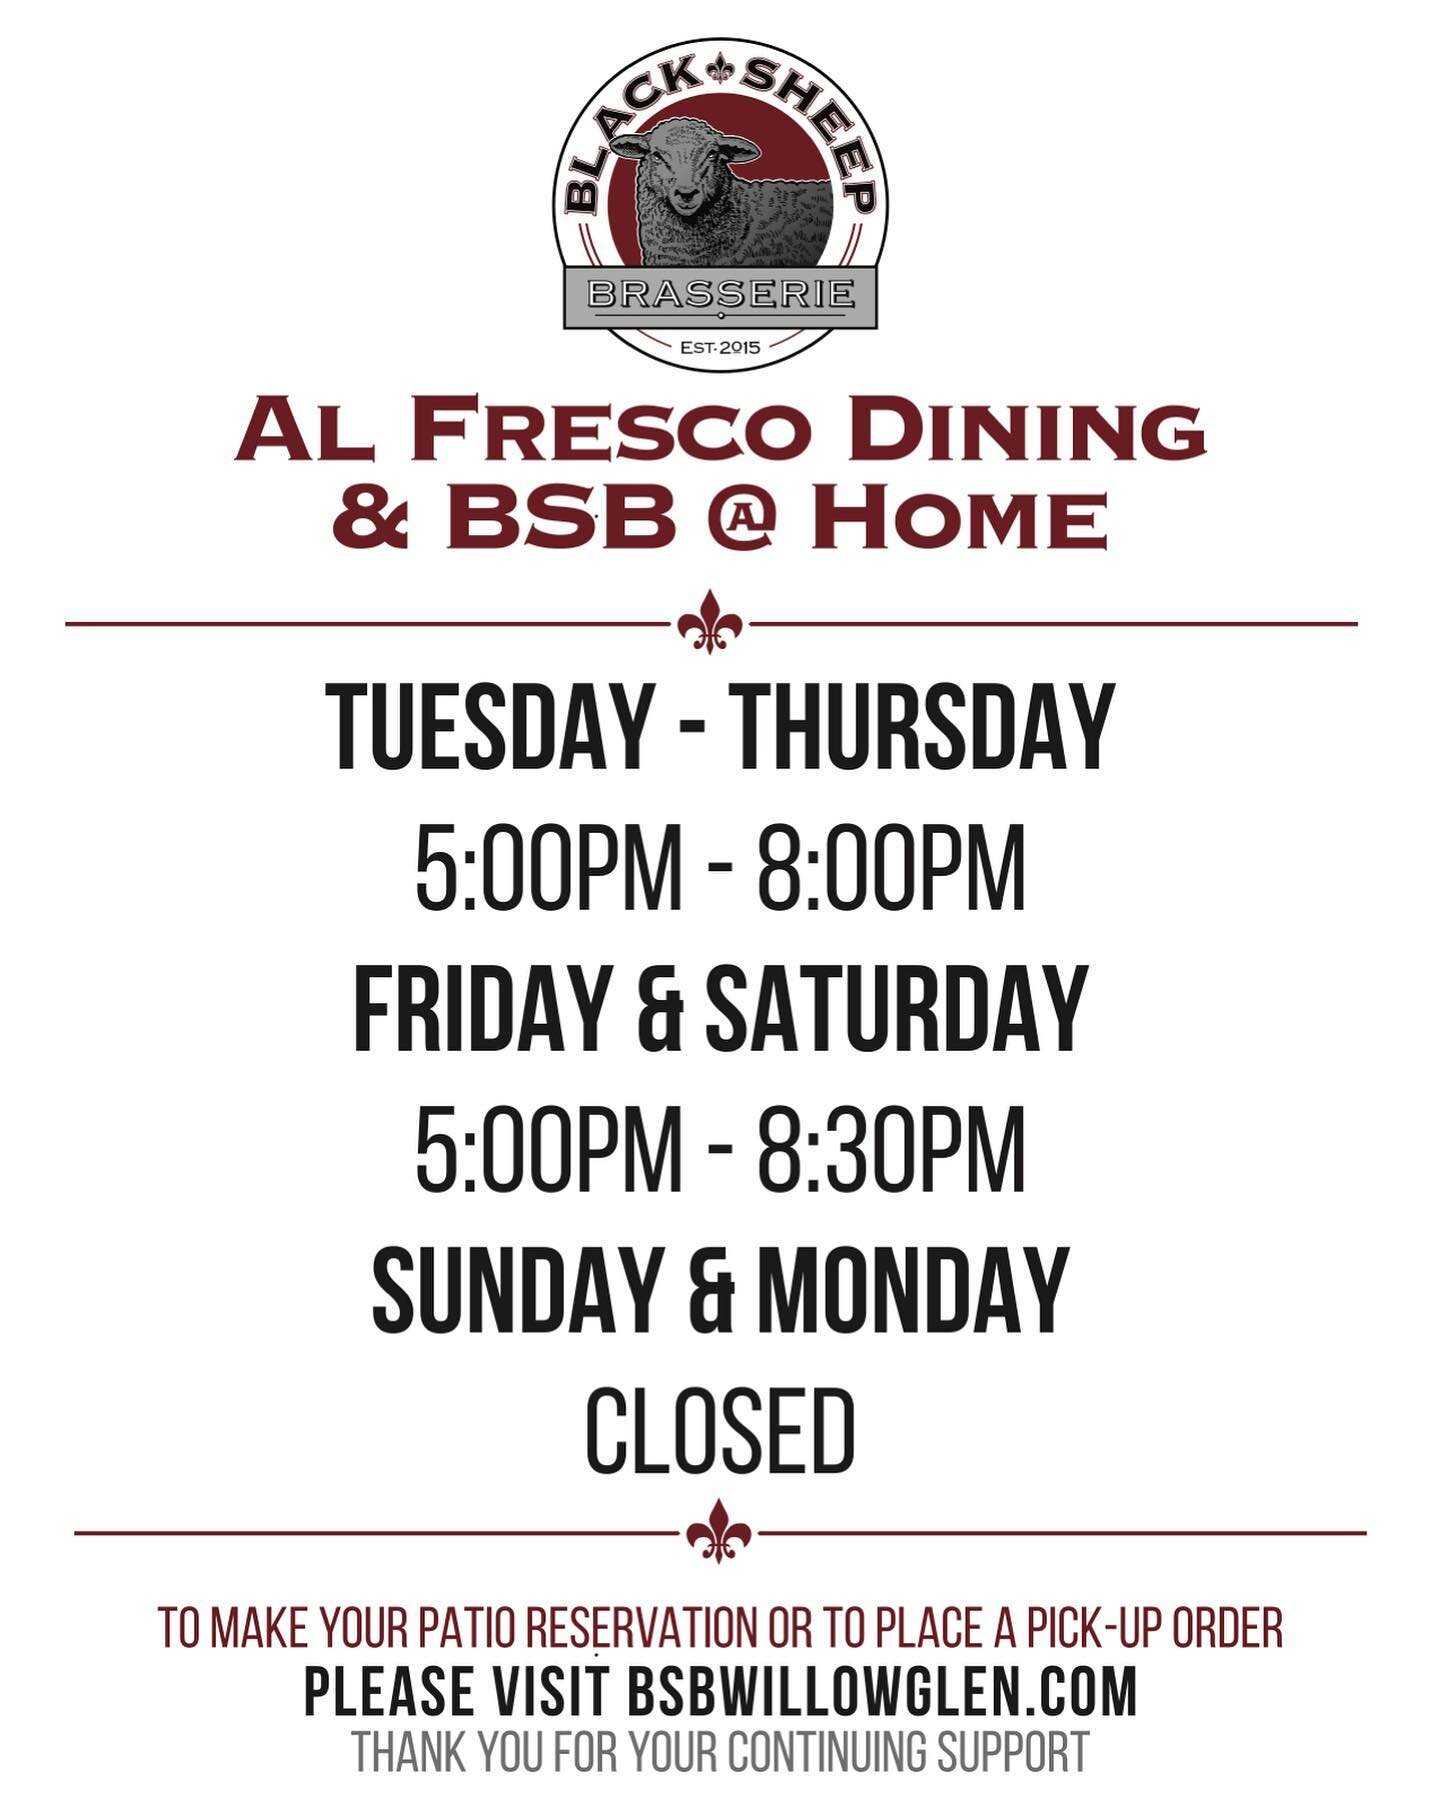 For those that may not know, we are now open 5 nights a week!

Our curbside pick-up menu has expanded, and we have limited al fresco dinner reservations!

Please note, we kindly ask that to-go orders and ALL reservations are booked online through the